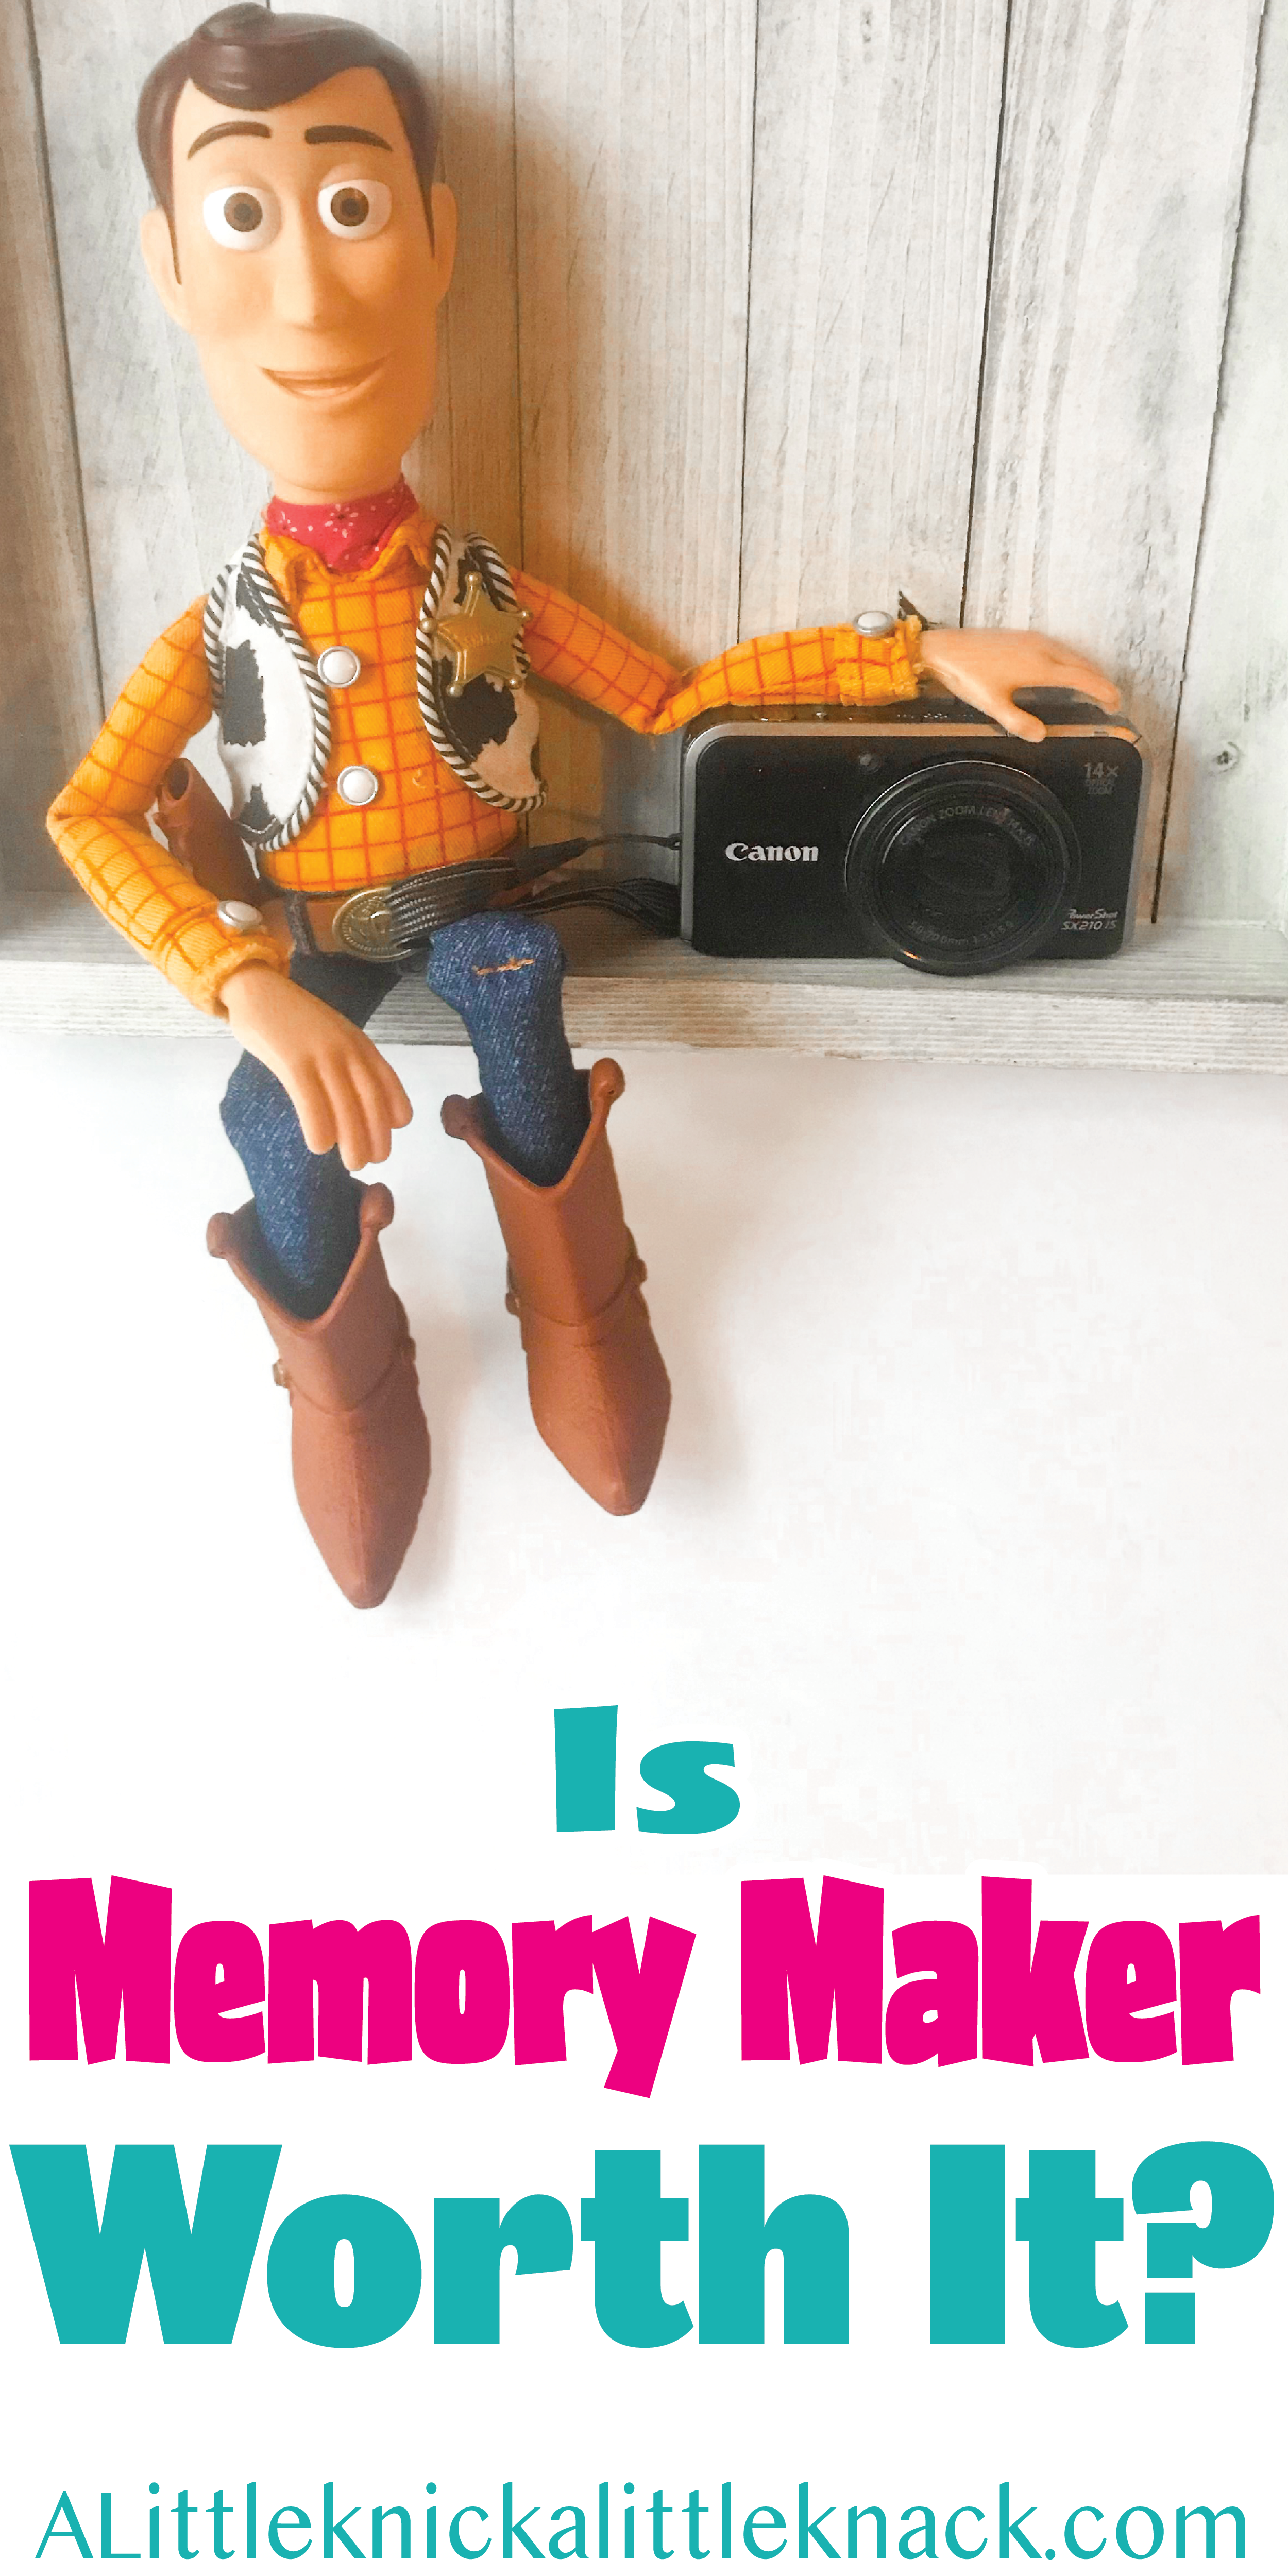 Woody next to a camera with a text overlay.